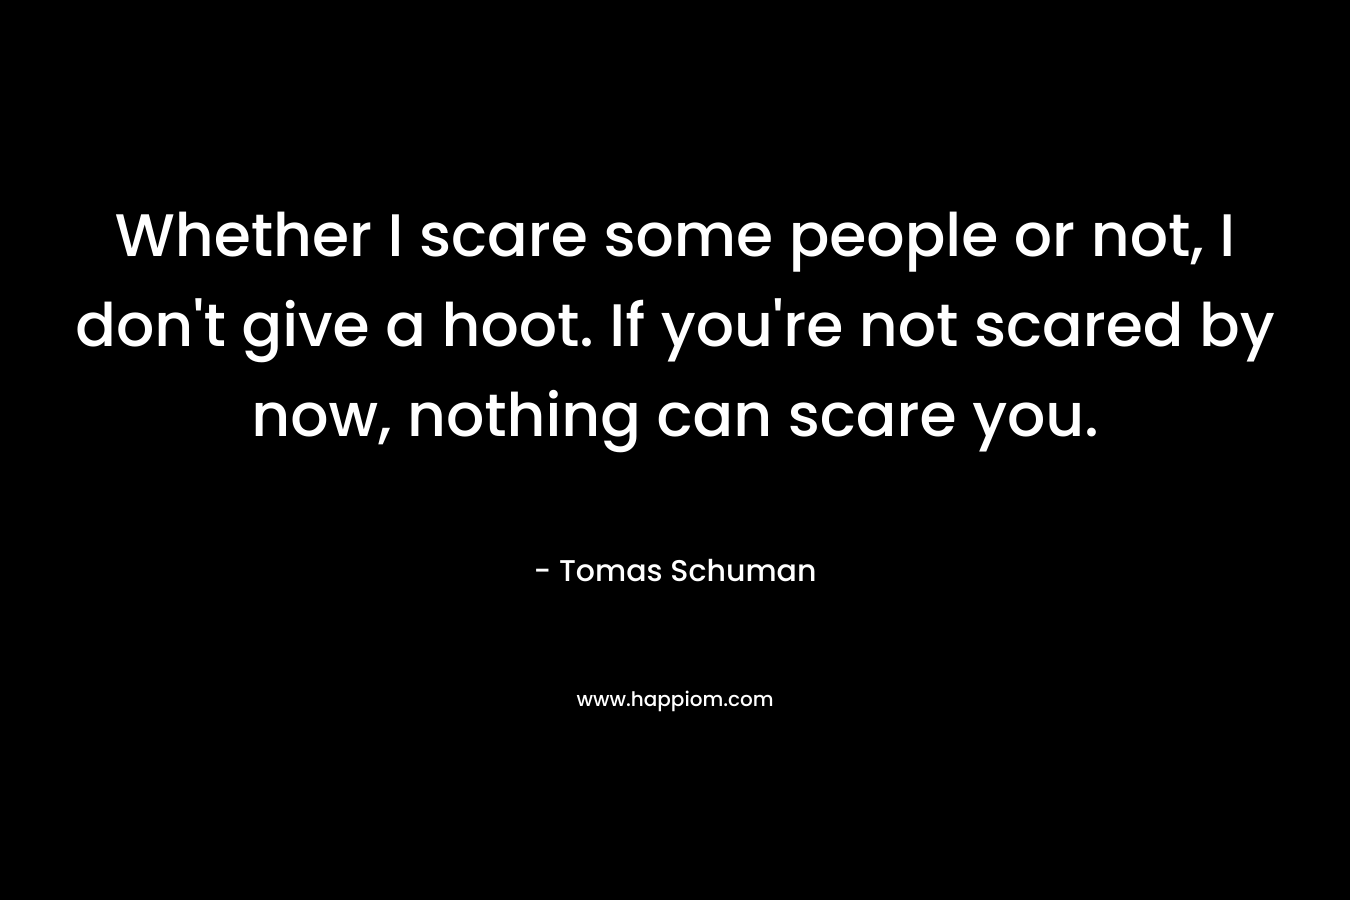 Whether I scare some people or not, I don't give a hoot. If you're not scared by now, nothing can scare you.